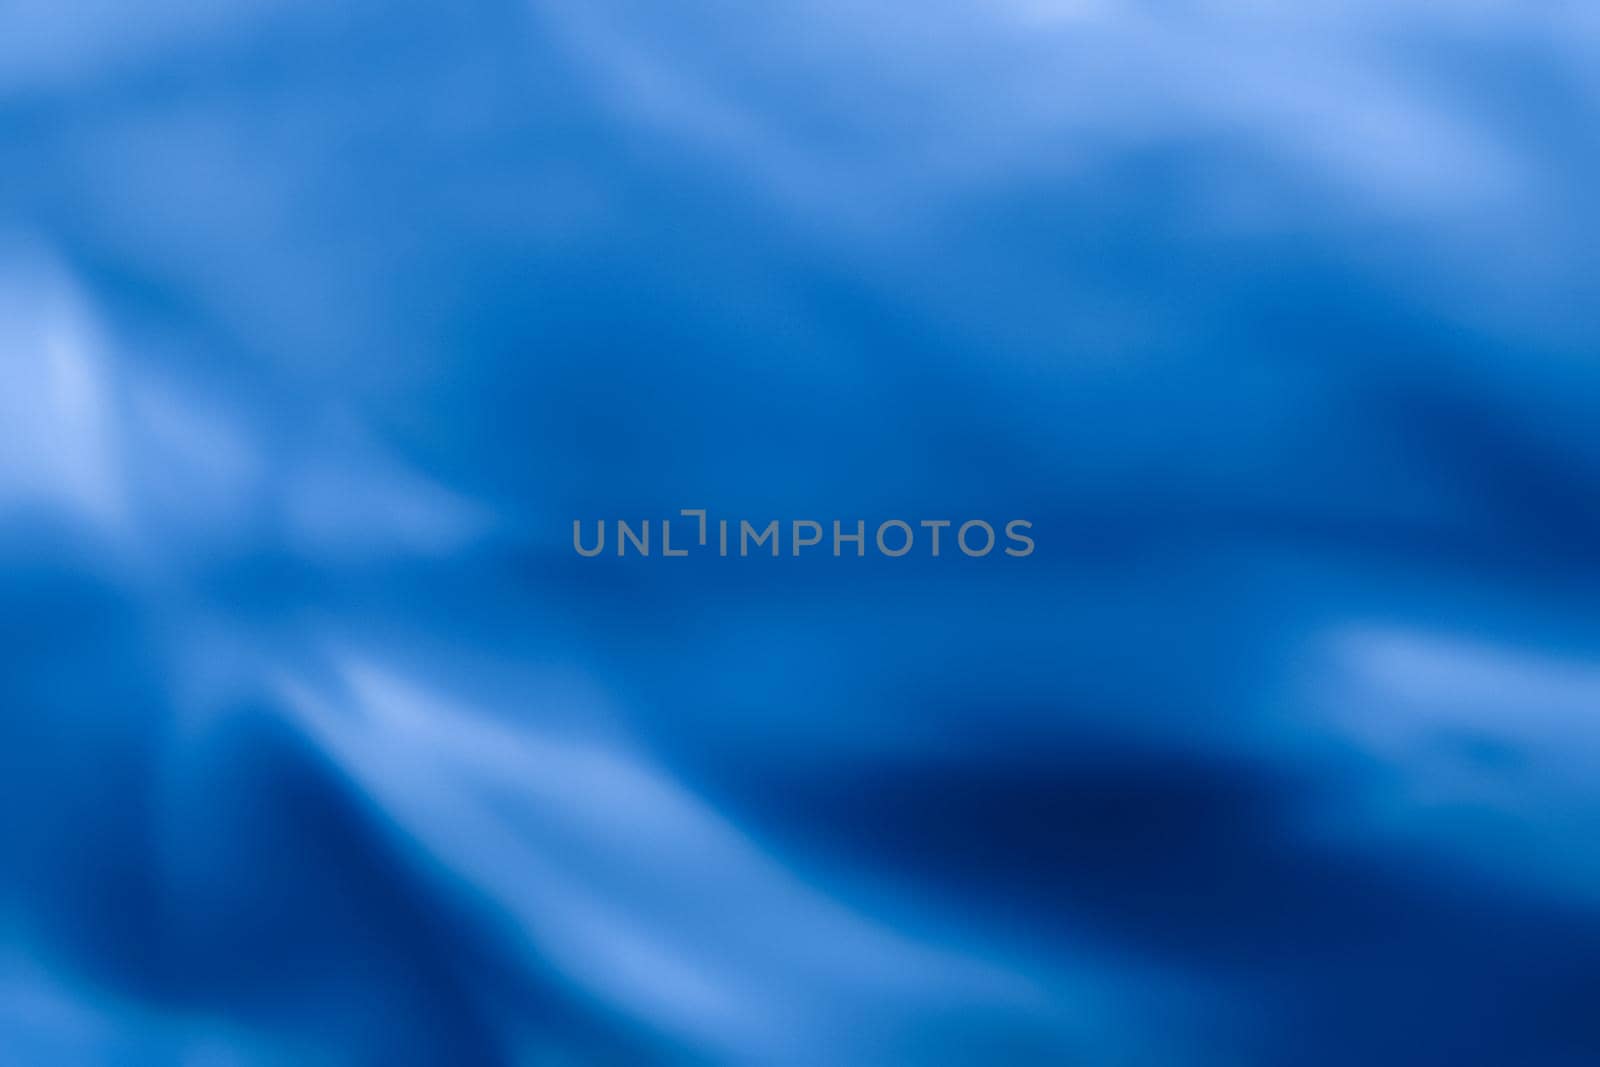 Holiday branding, beauty glamour and cyber backgrounds concept - Blue abstract art background, silk texture and wave lines in motion for classic luxury design